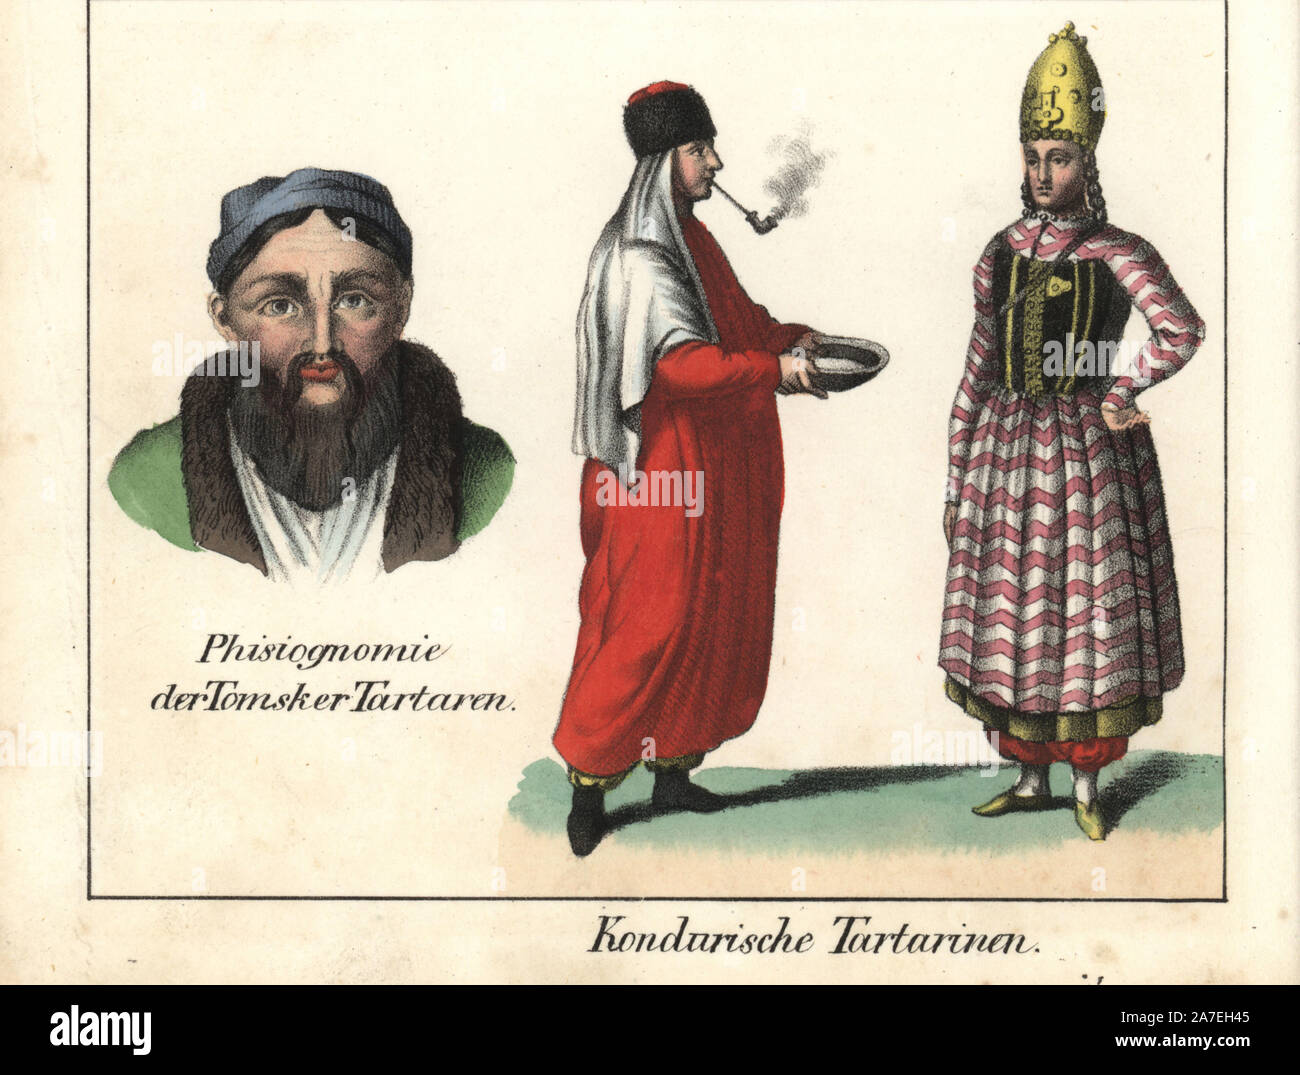 Tatar women smoking a pipe and wearing a mitre from Condara? and the physiognomy of a Tomsk Tatar man. Handcoloured lithograph from Friedrich Wilhelm Goedsche's "Vollstaendige Völkergallerie in getreuen Abbildungen" (Complete Gallery of Peoples in True Pictures), Meissen, circa 1835-1840. Goedsche (1785-1863) was a German writer, bookseller and publisher in Meissen. Many of the illustrations were adapted from Bertuch's "Bilderbuch fur Kinder" and others. Stock Photo